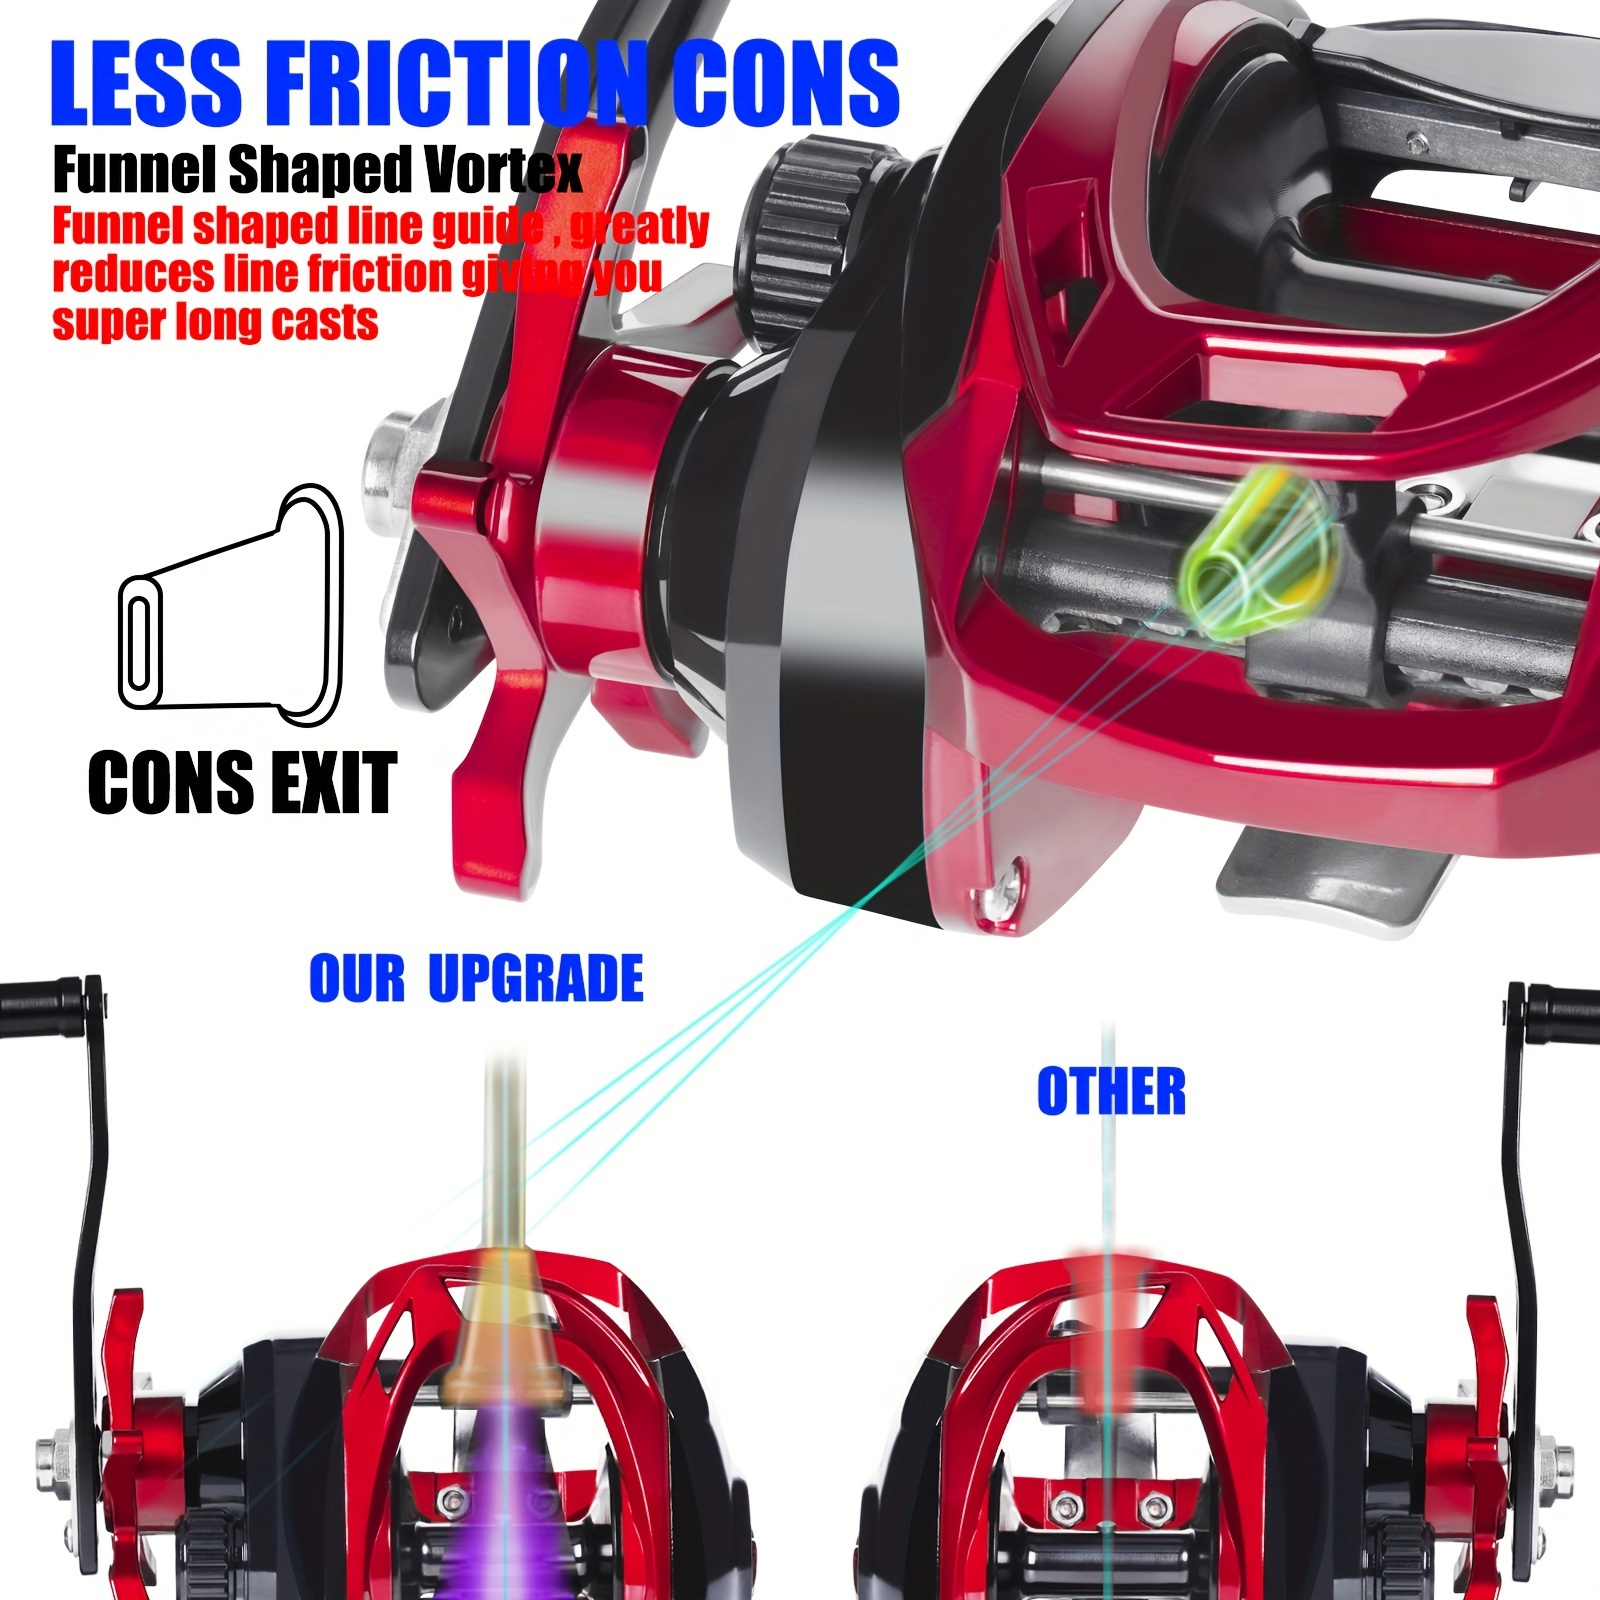 Lacusmall Baitcaster Reels, Fishing Reels with 6.3:1 Gear Ratio,  Baitcasting Reel with Magnet Braking System, Bait Casters Reel with Fishing  Alarm System, 17.6 LB Max Drag(C: Right-6.3:1Blue), Baitcasting Reels -   Canada